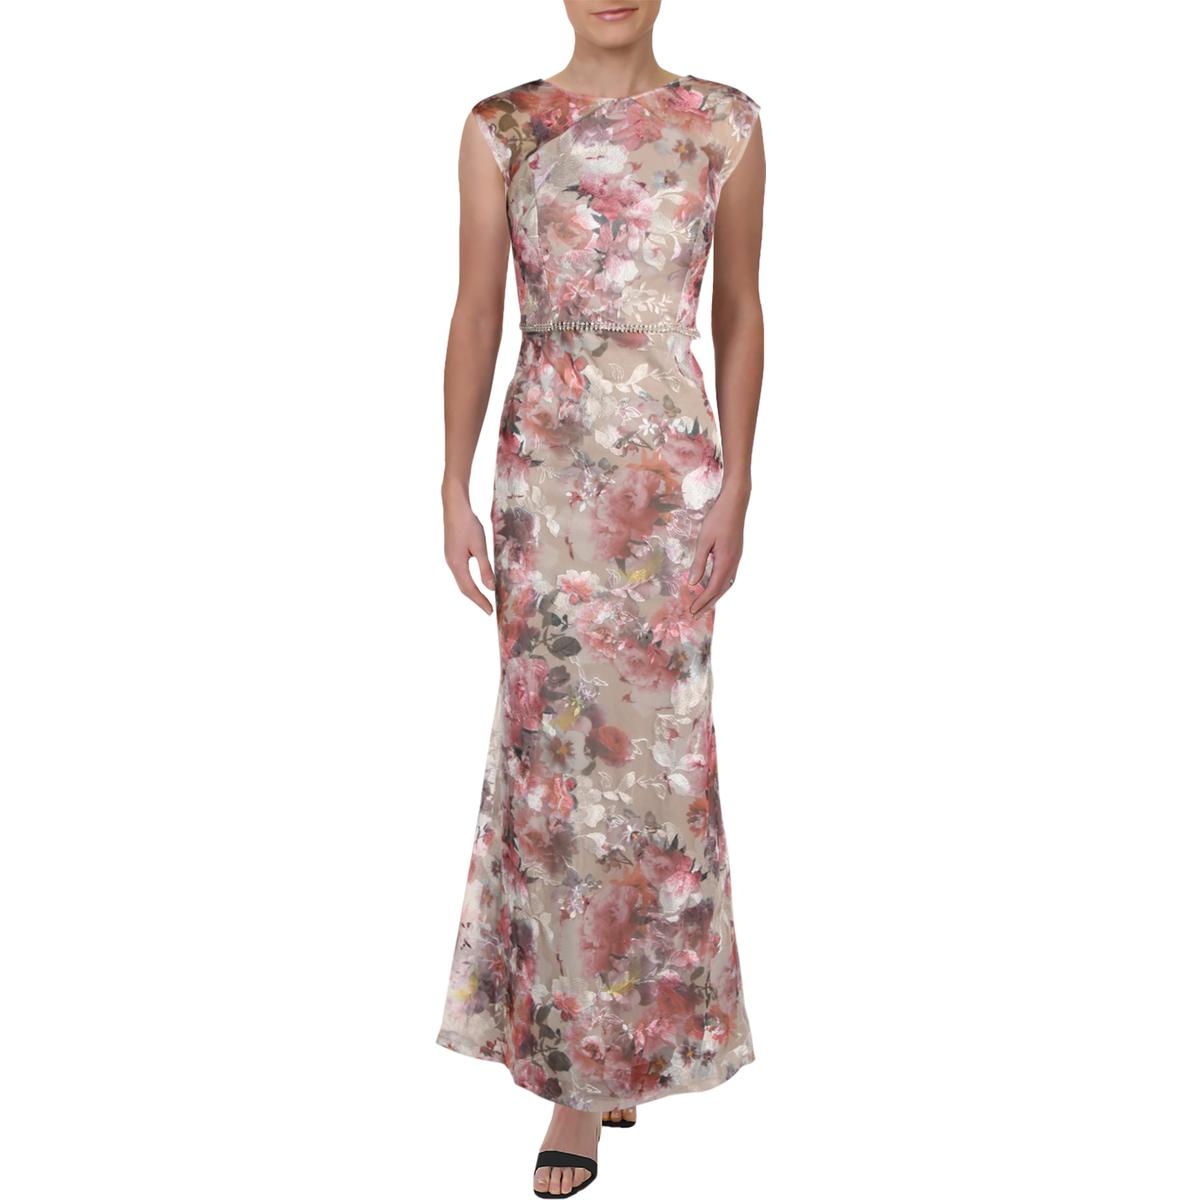 SLNY Womens Pink Floral Embellished Evening Formal Dress Gown 6 BHFO ...